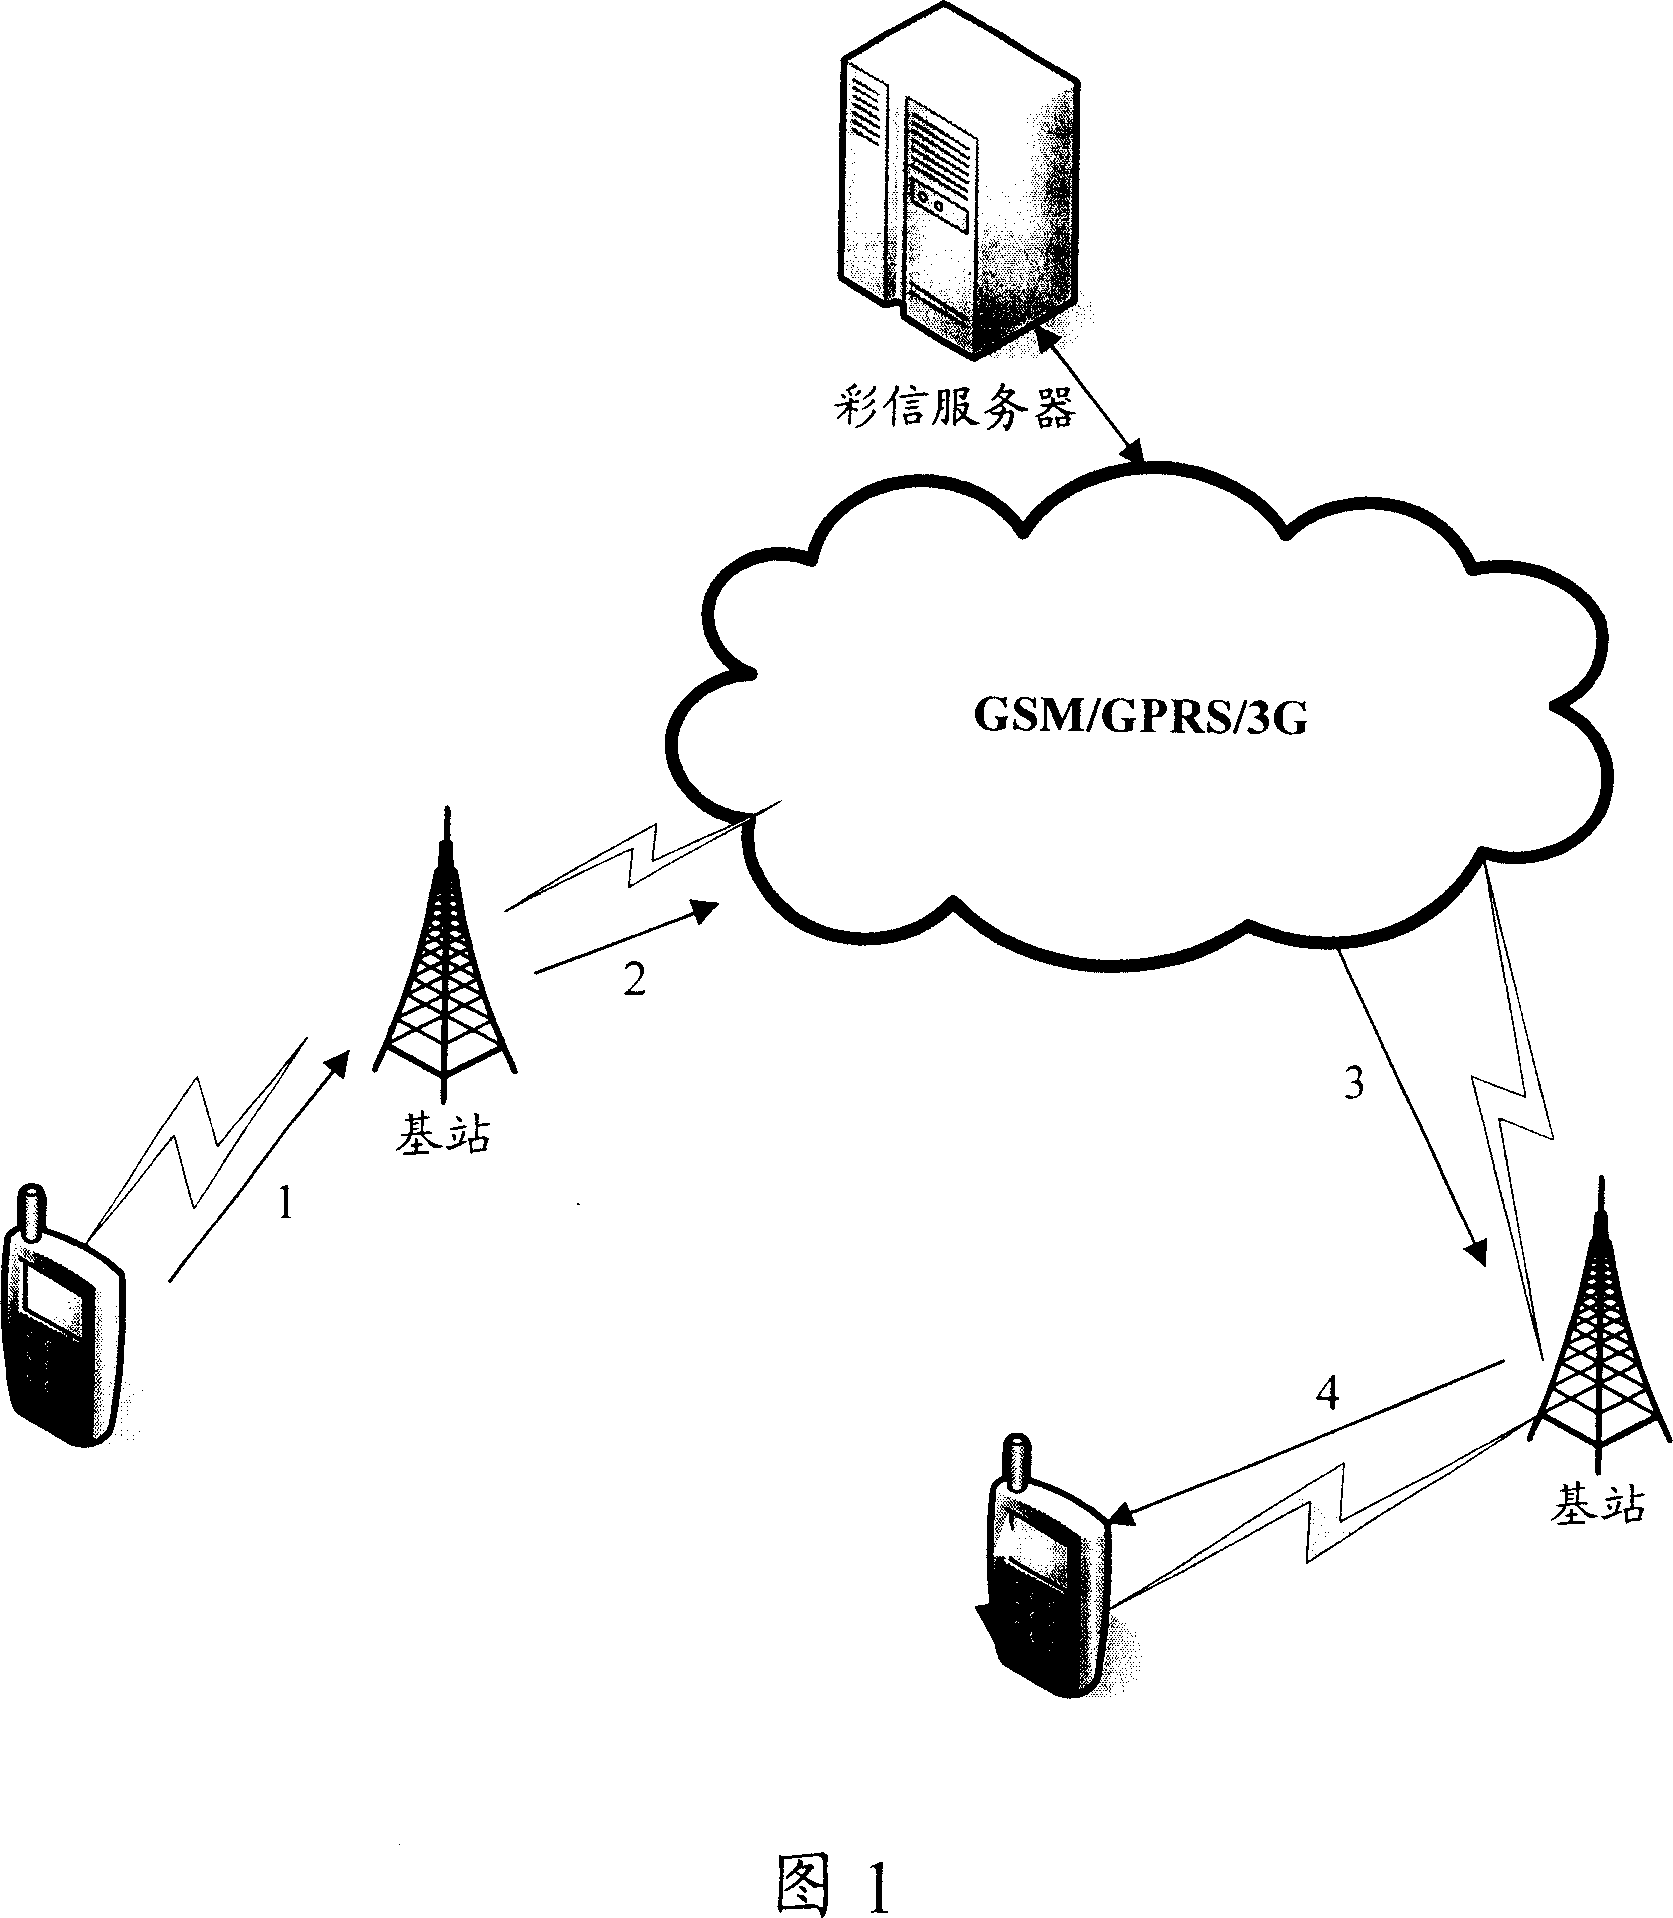 System for realizing multimeda messaging service (MMS) based on television terminal